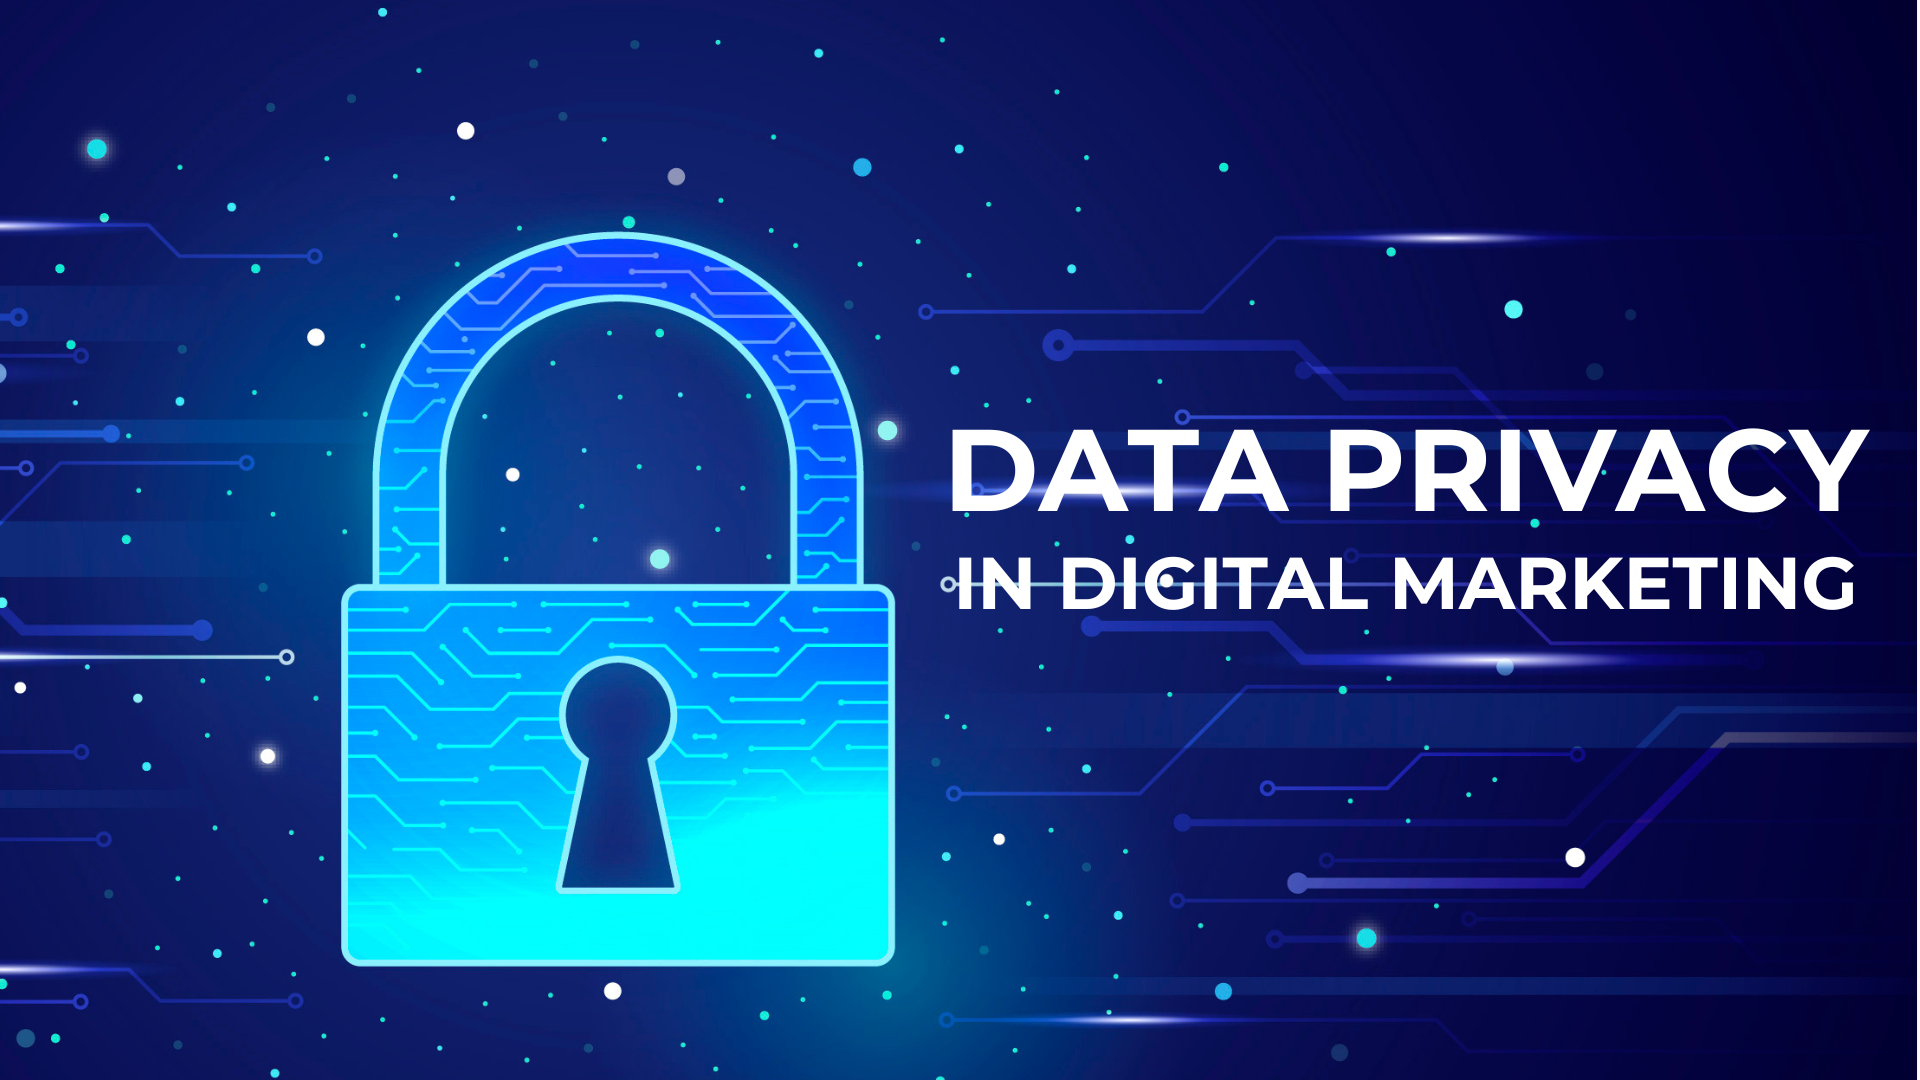 The Ethics of Data Privacy and Usage in Digital Marketing